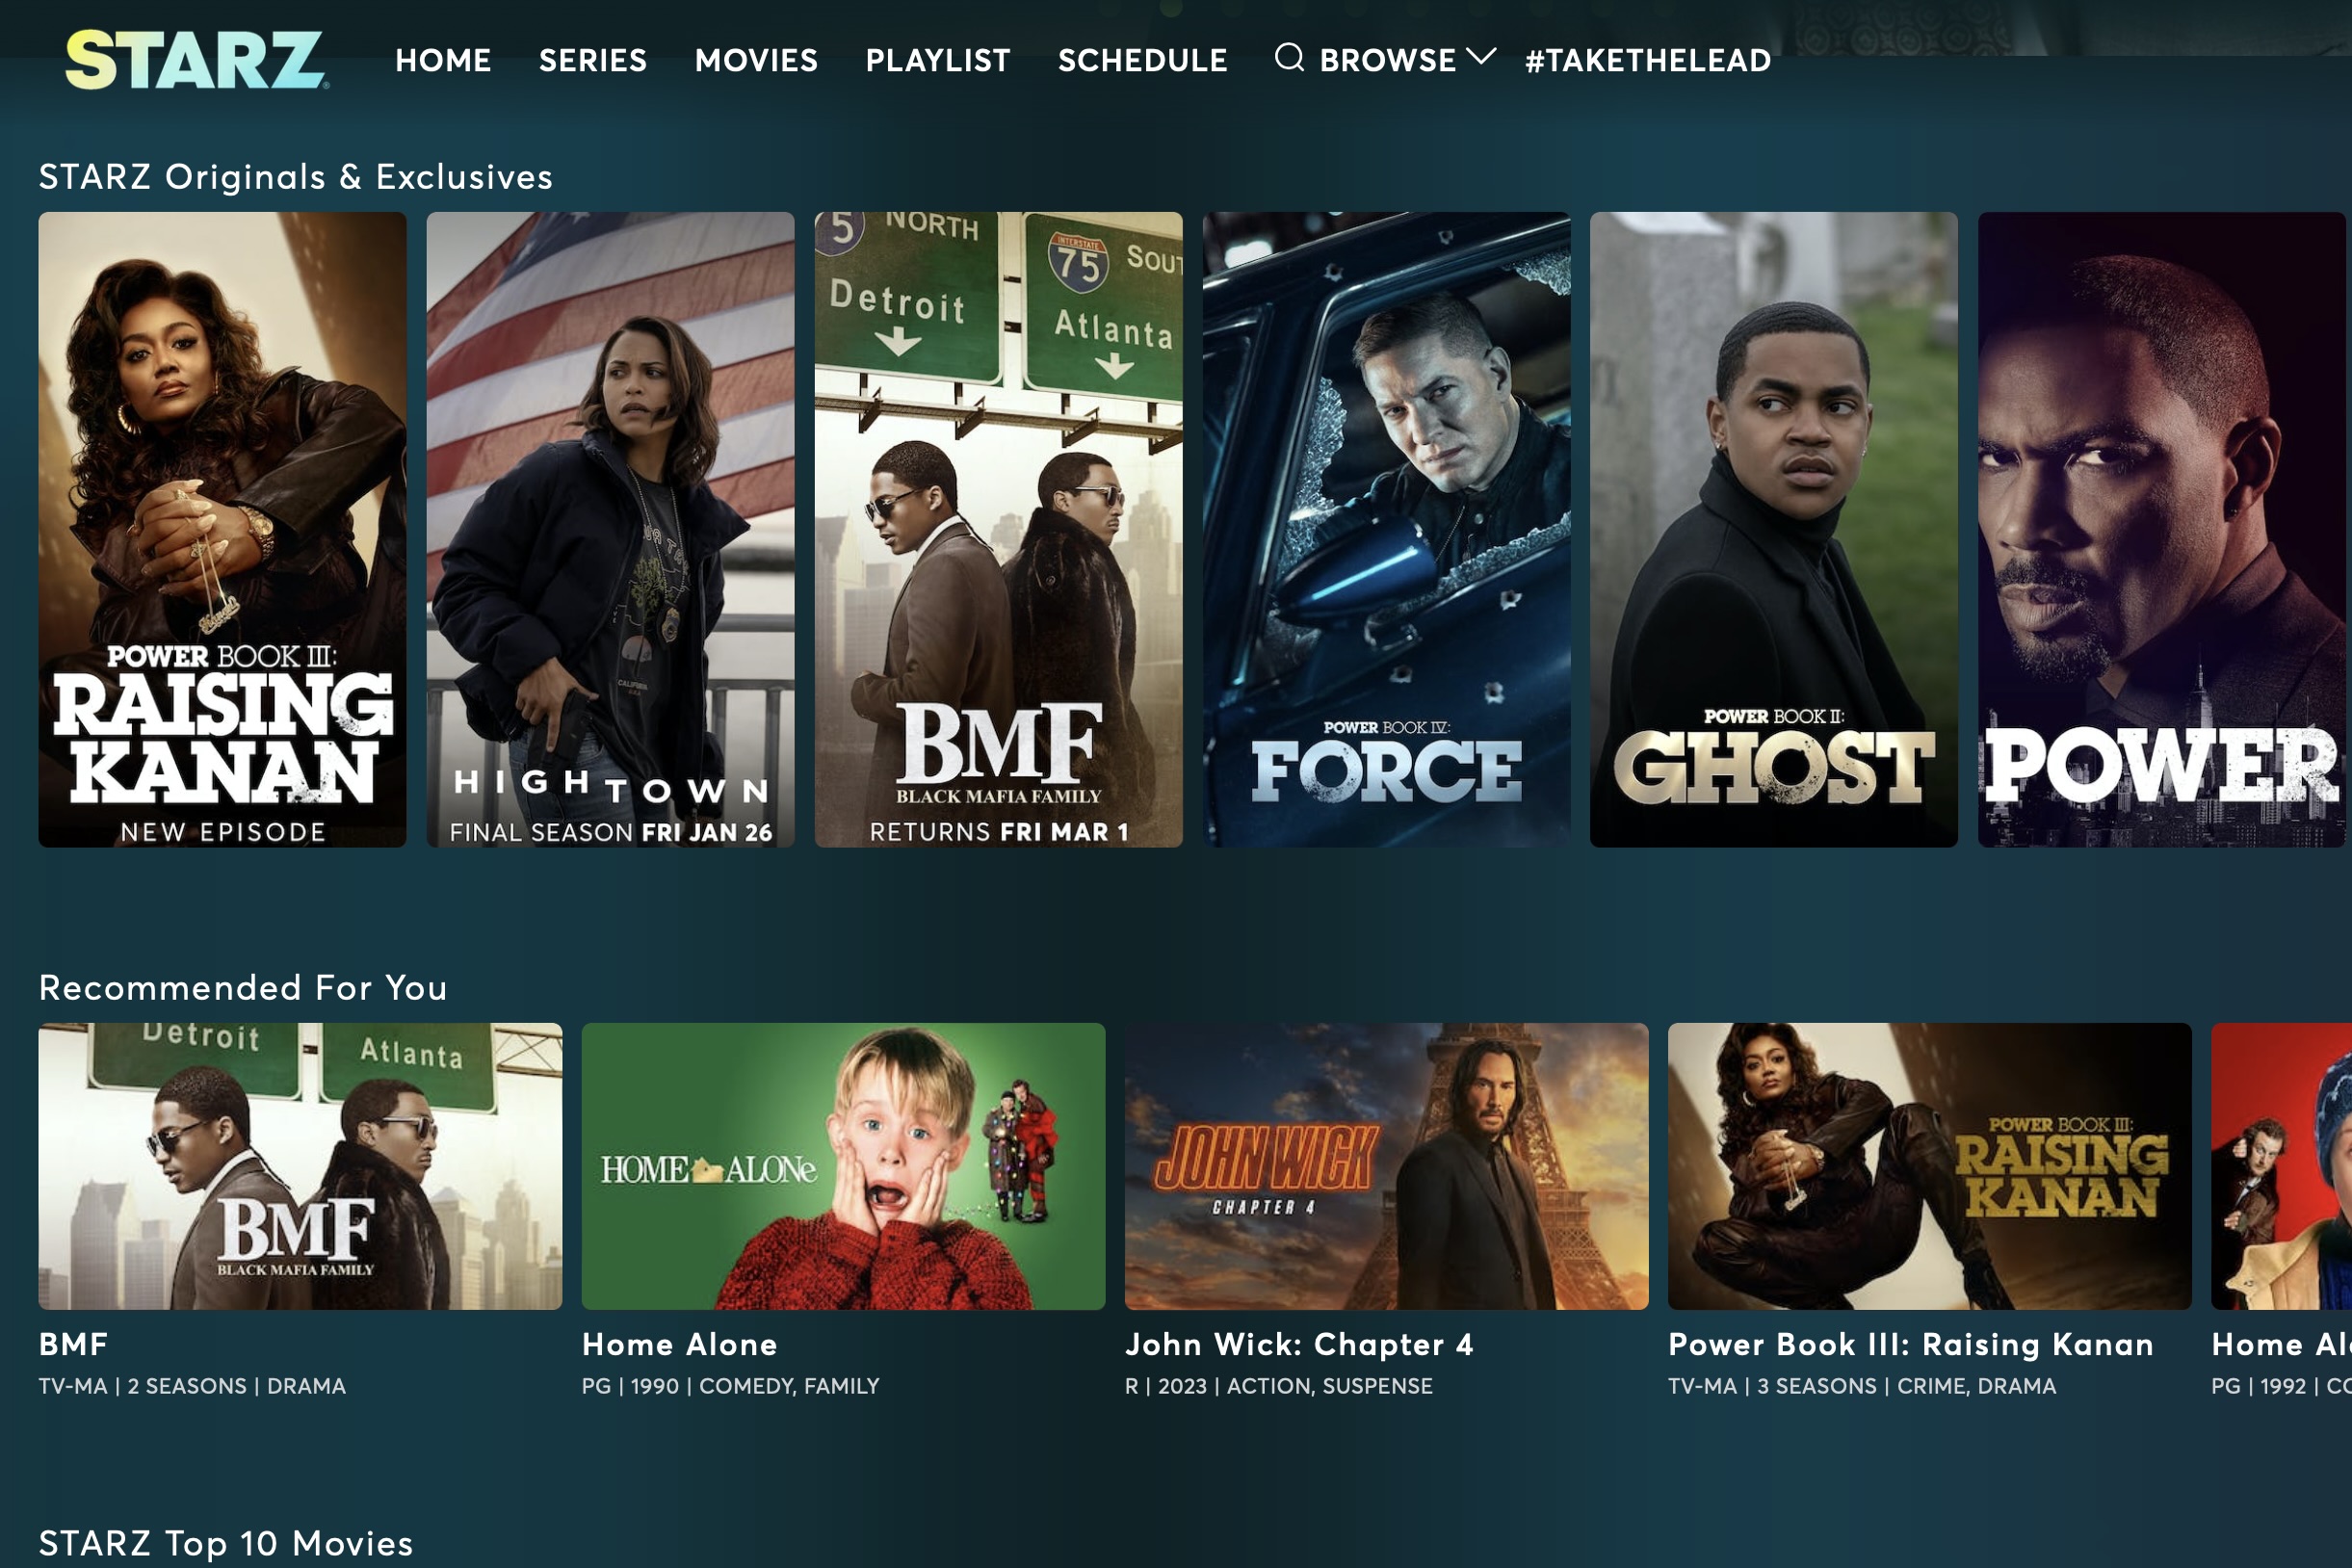 The home screen for both the Starz website and Starz web player.